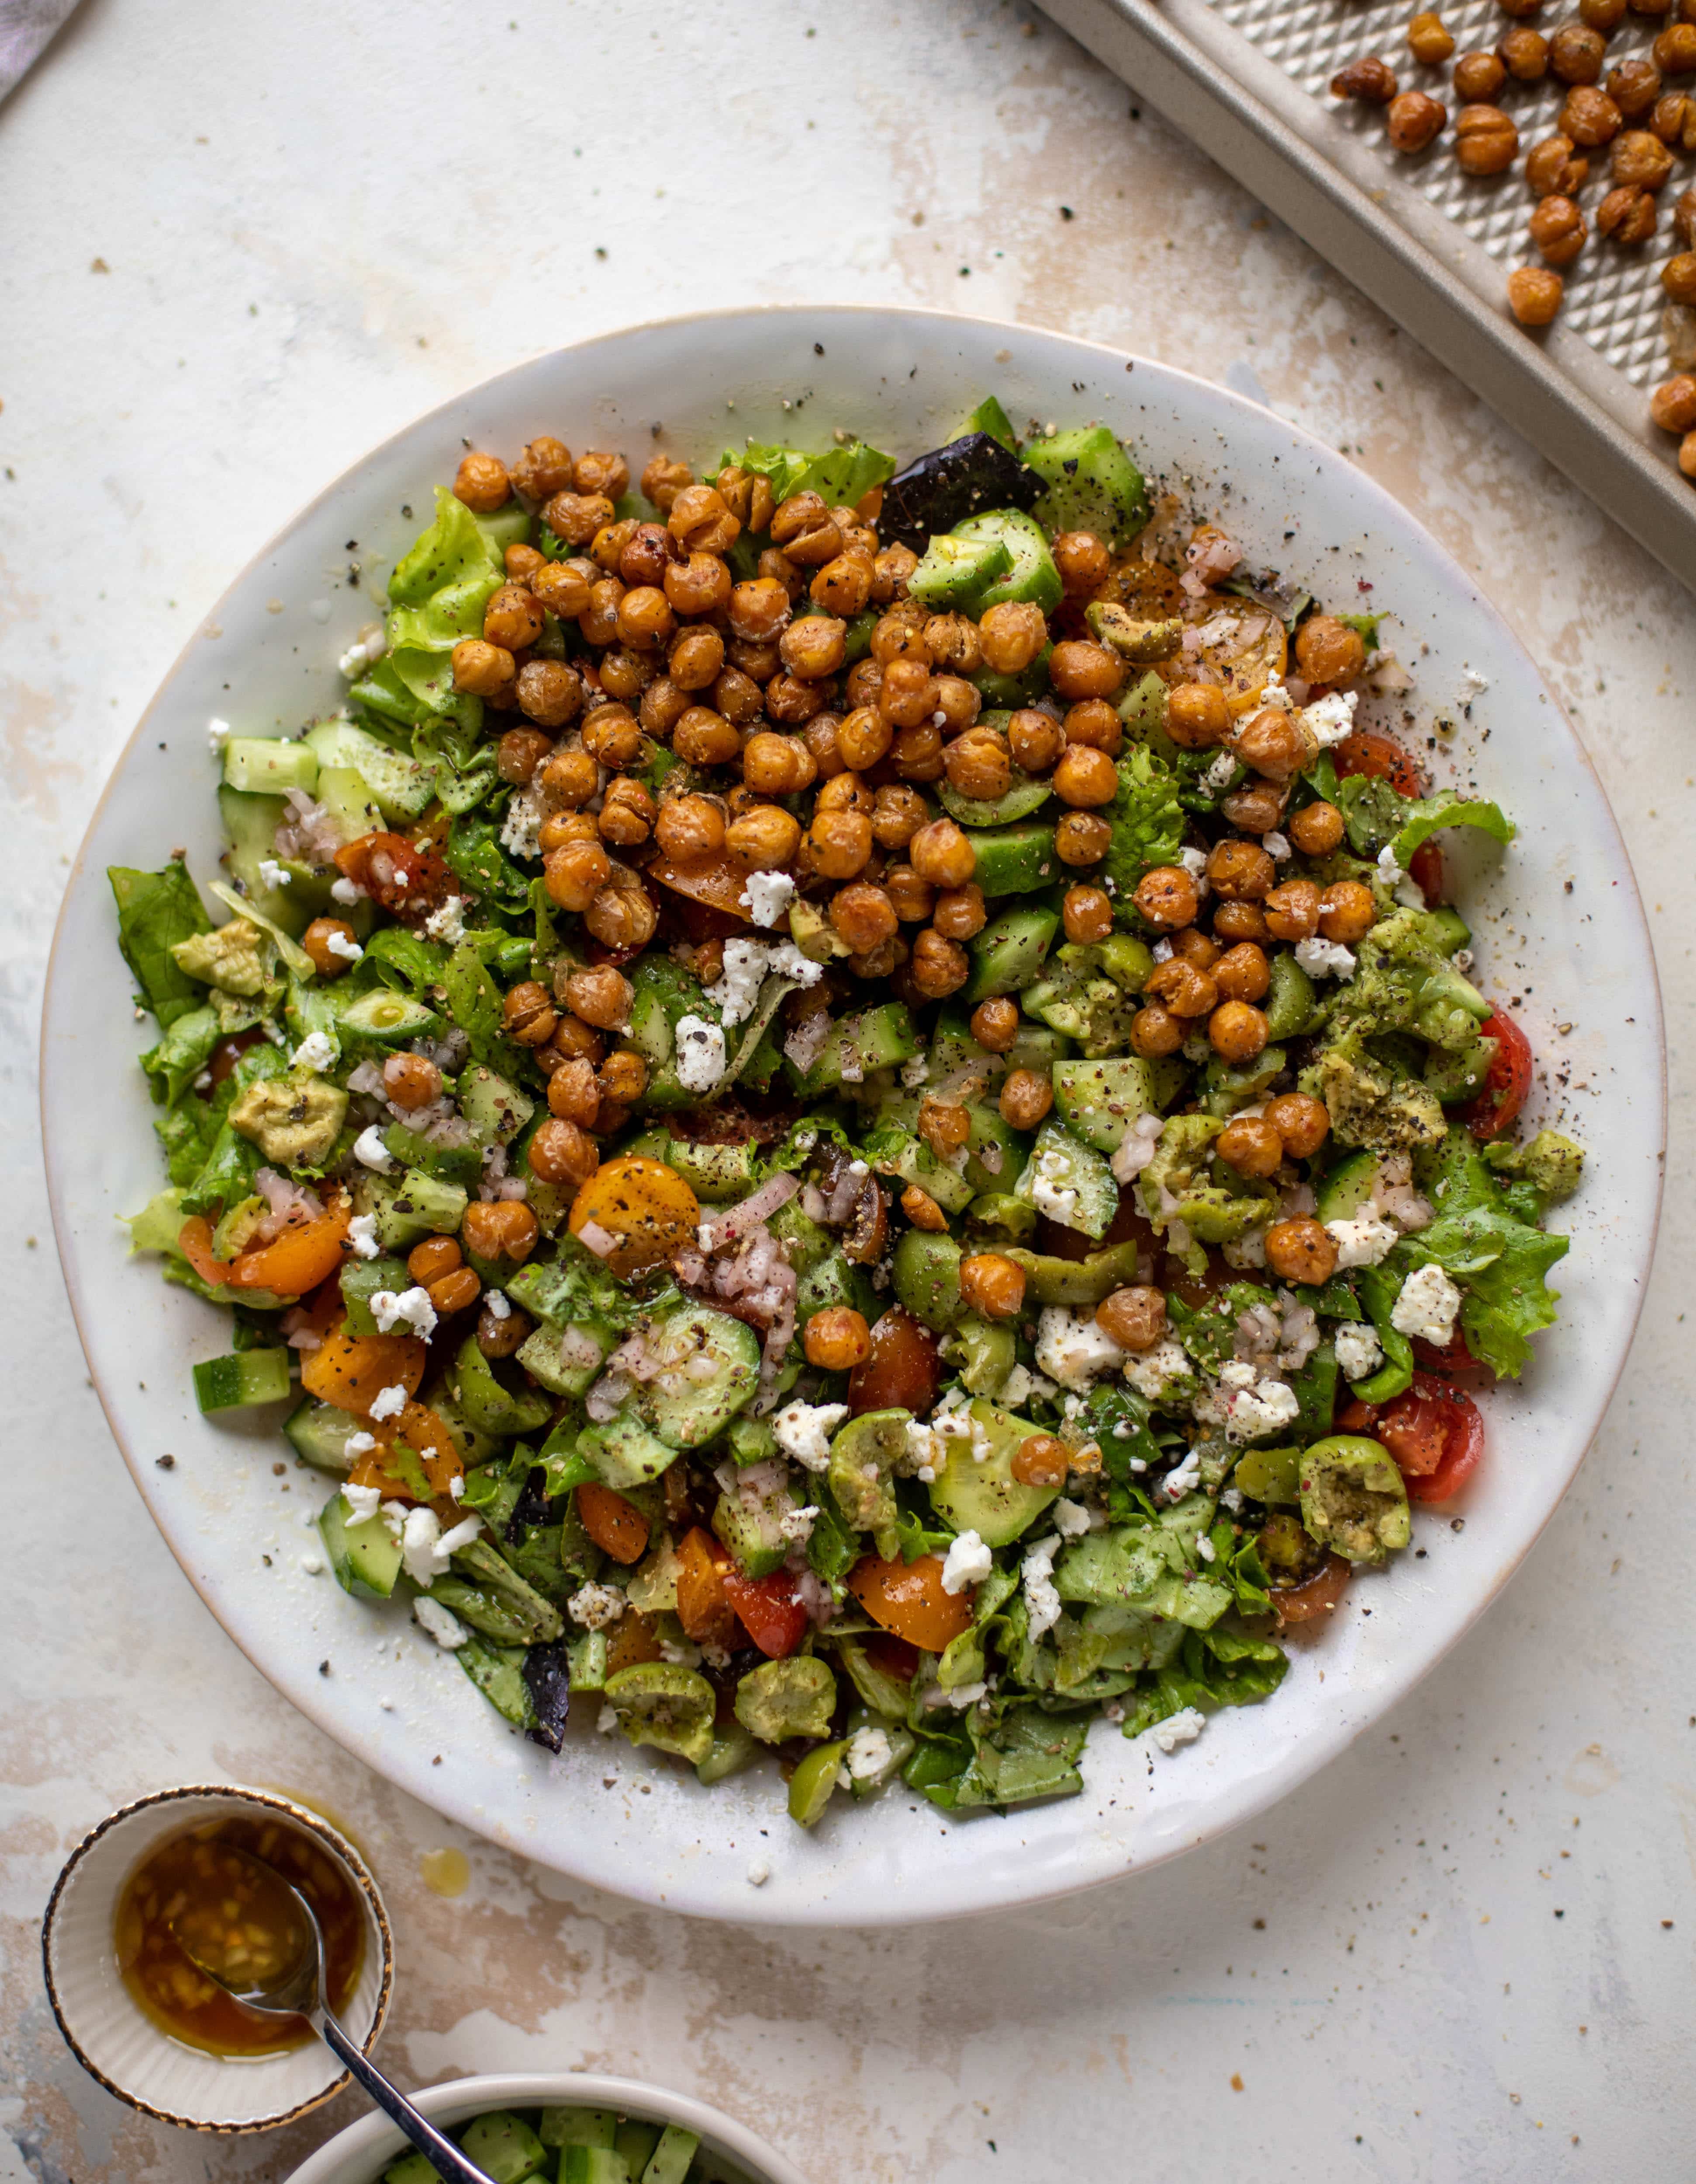 This crispy chickpea chopped salad is super simple and loaded with flavor. It's an incredible side or starter and a huge crowd pleaser! 